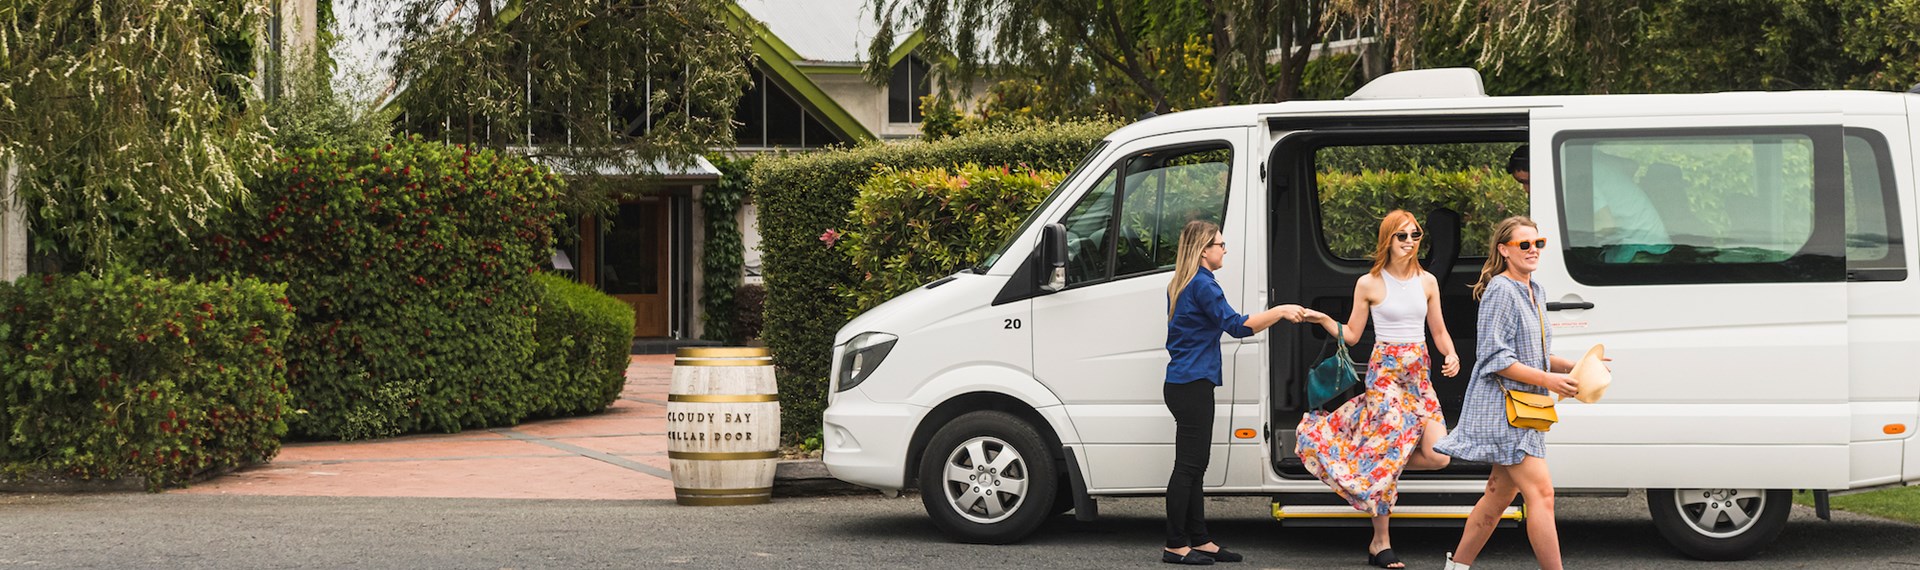 Two women are helped out of a van by a Marlborough Tour Co staff member on a wine tour at a winery cellar door in Marlborough, at the top of New Zealand's South Island